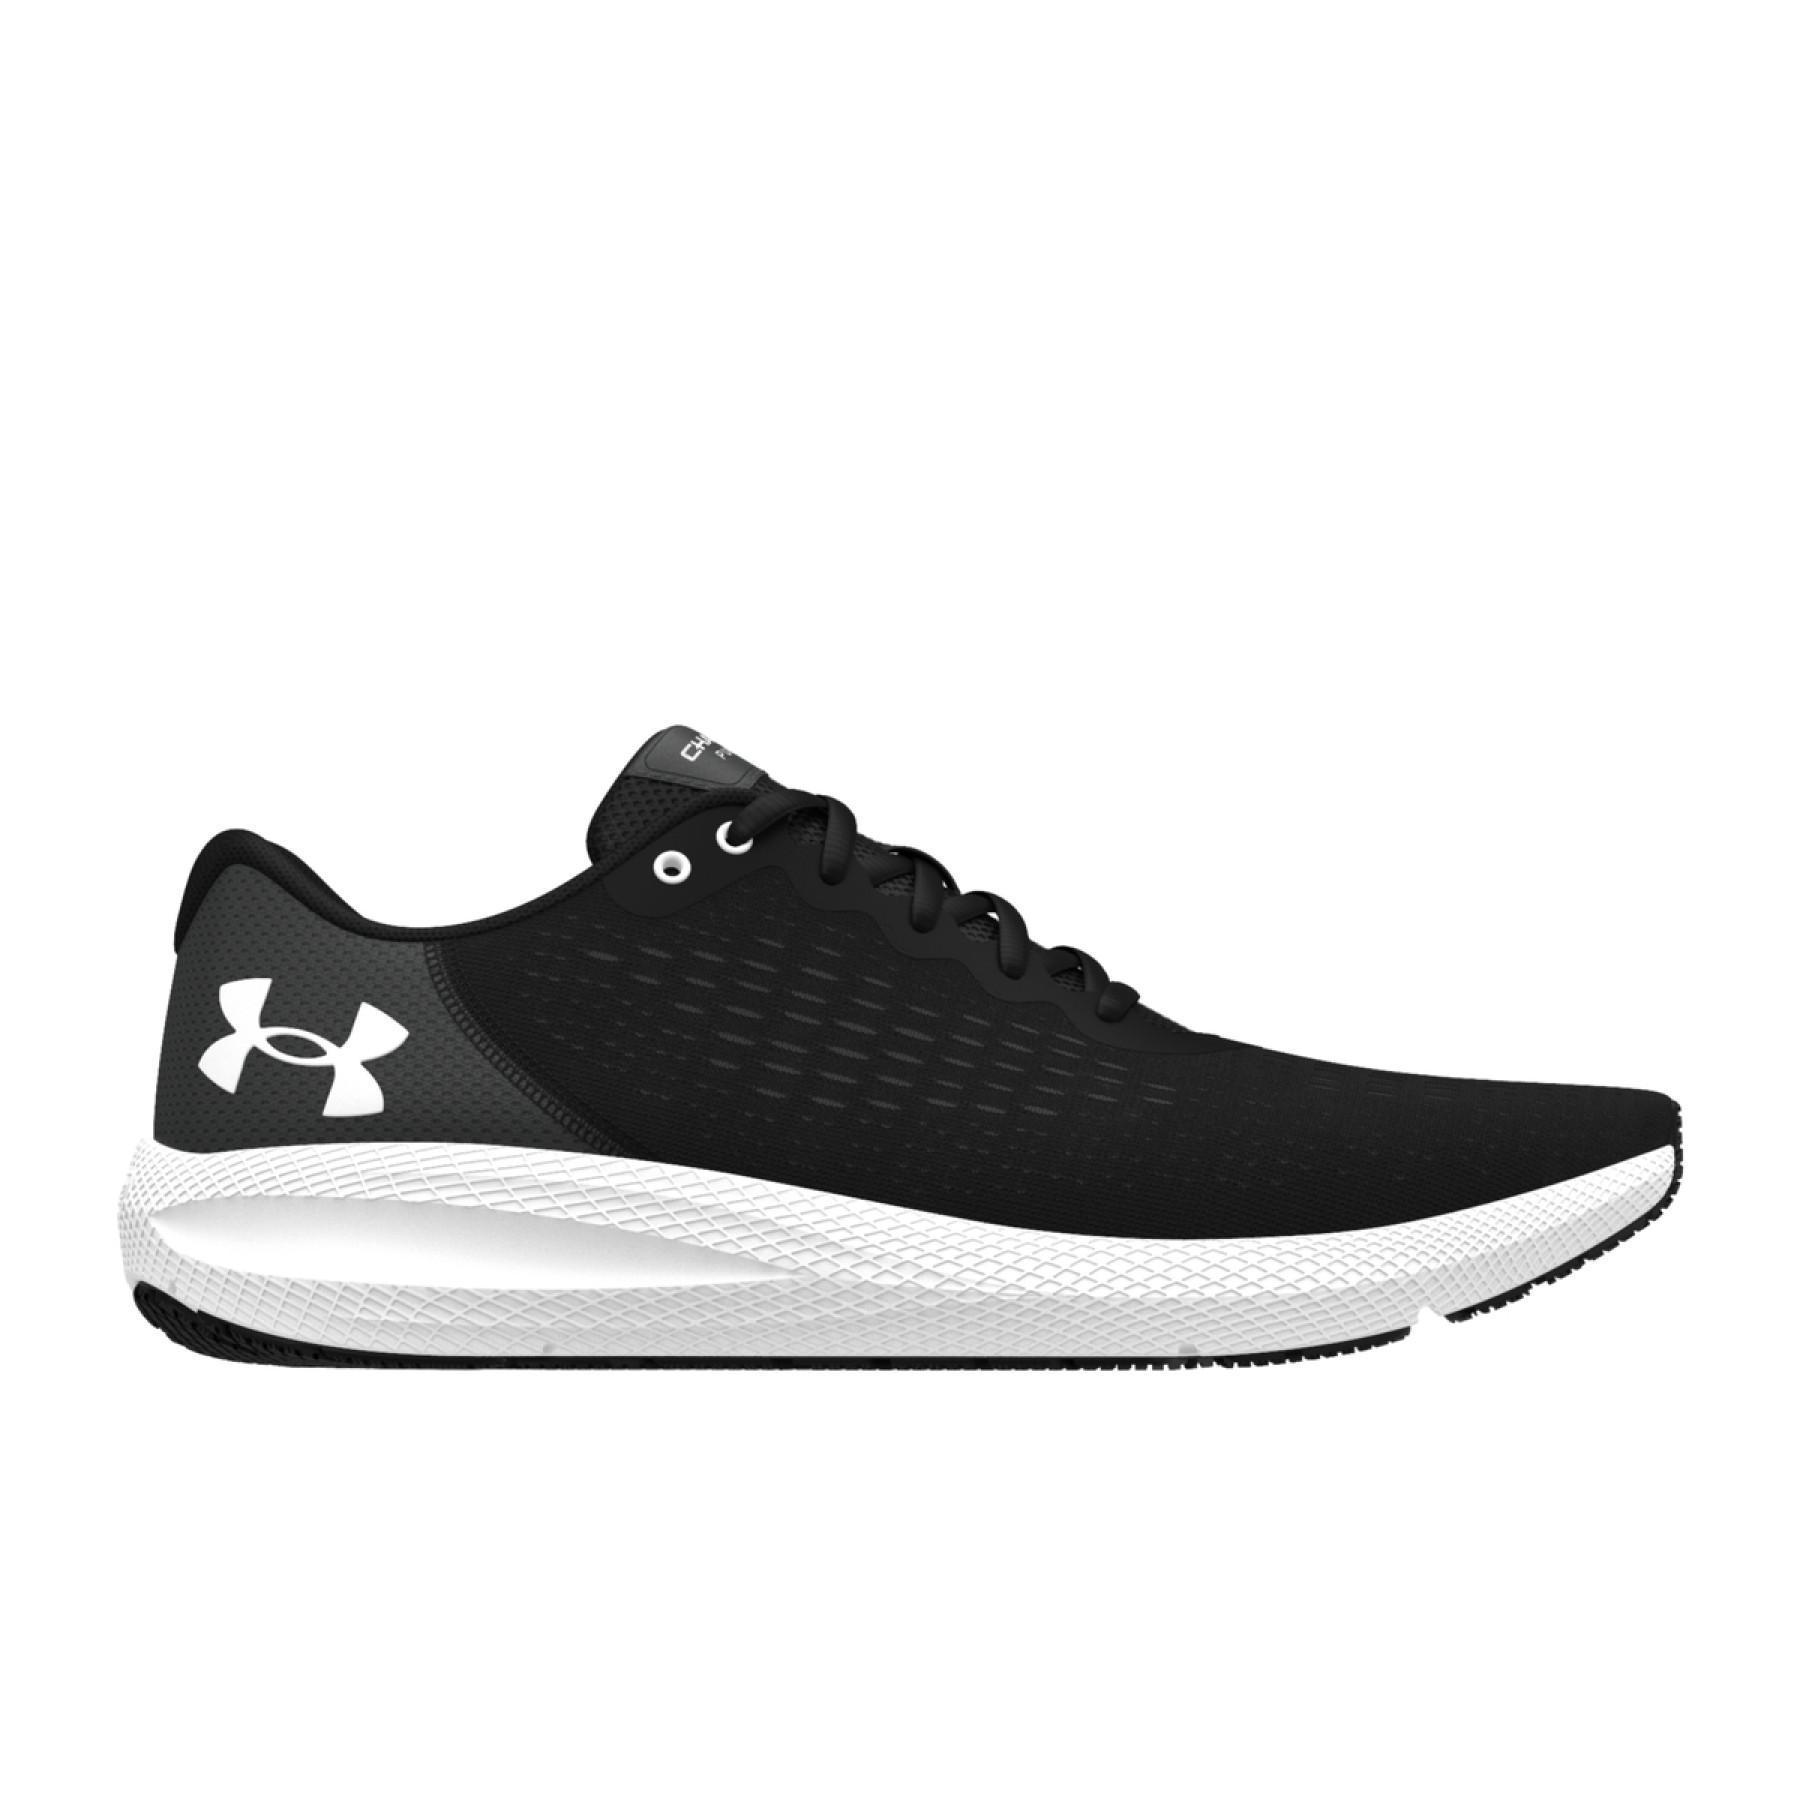 Buty do biegania Under Armour Charged Pursuit 2 SE